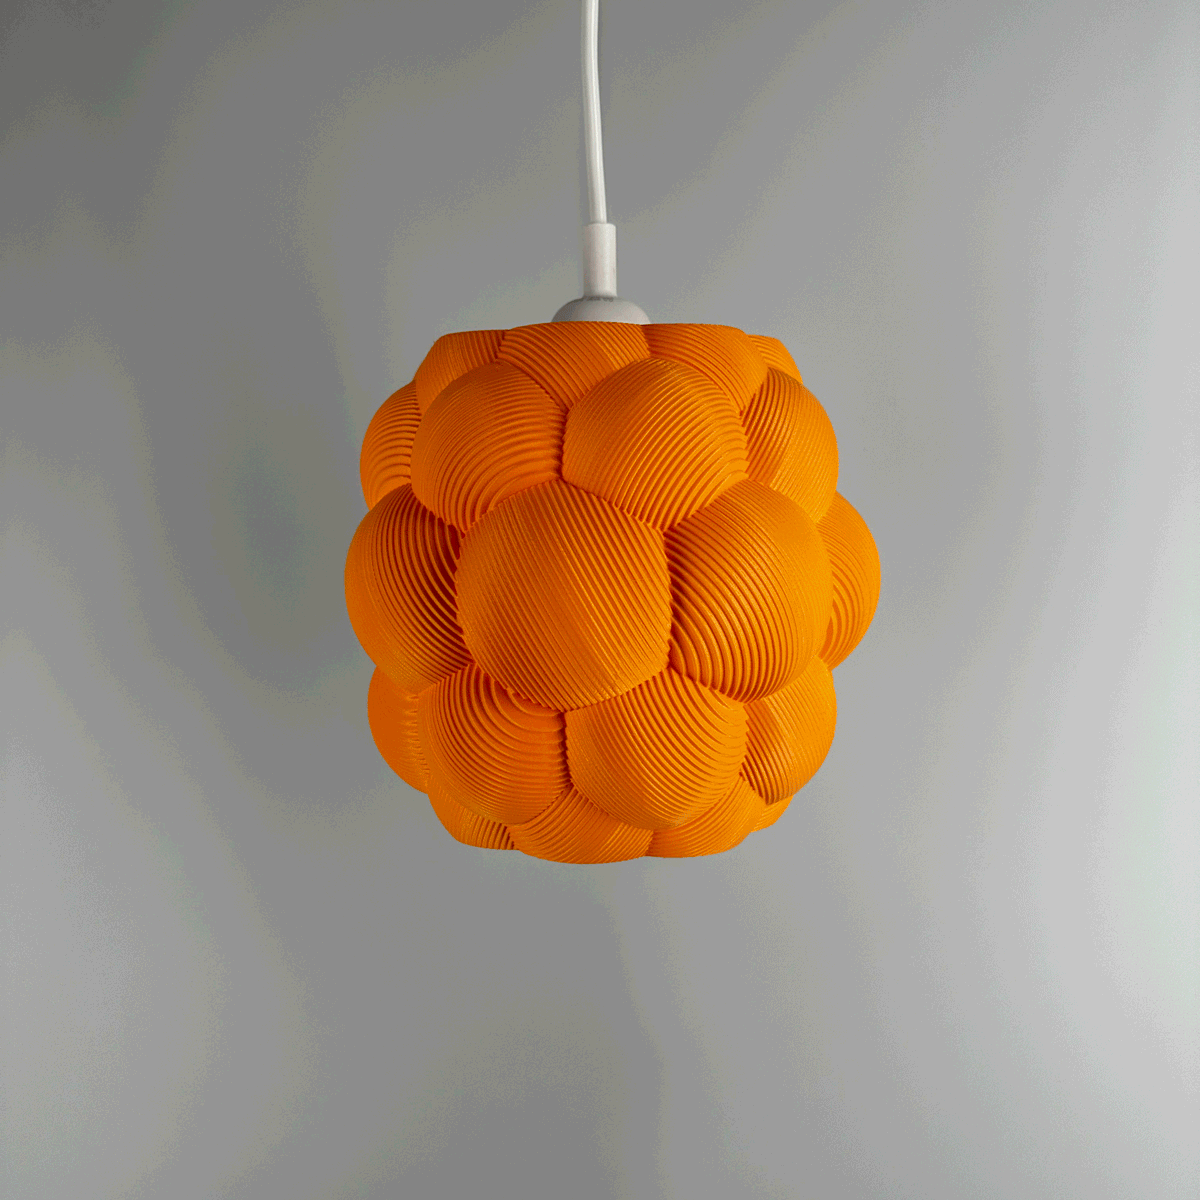 3D printed Apo Malli lampshade in modern design in orange biodegradable material. Used with 400k LED bulb on and off